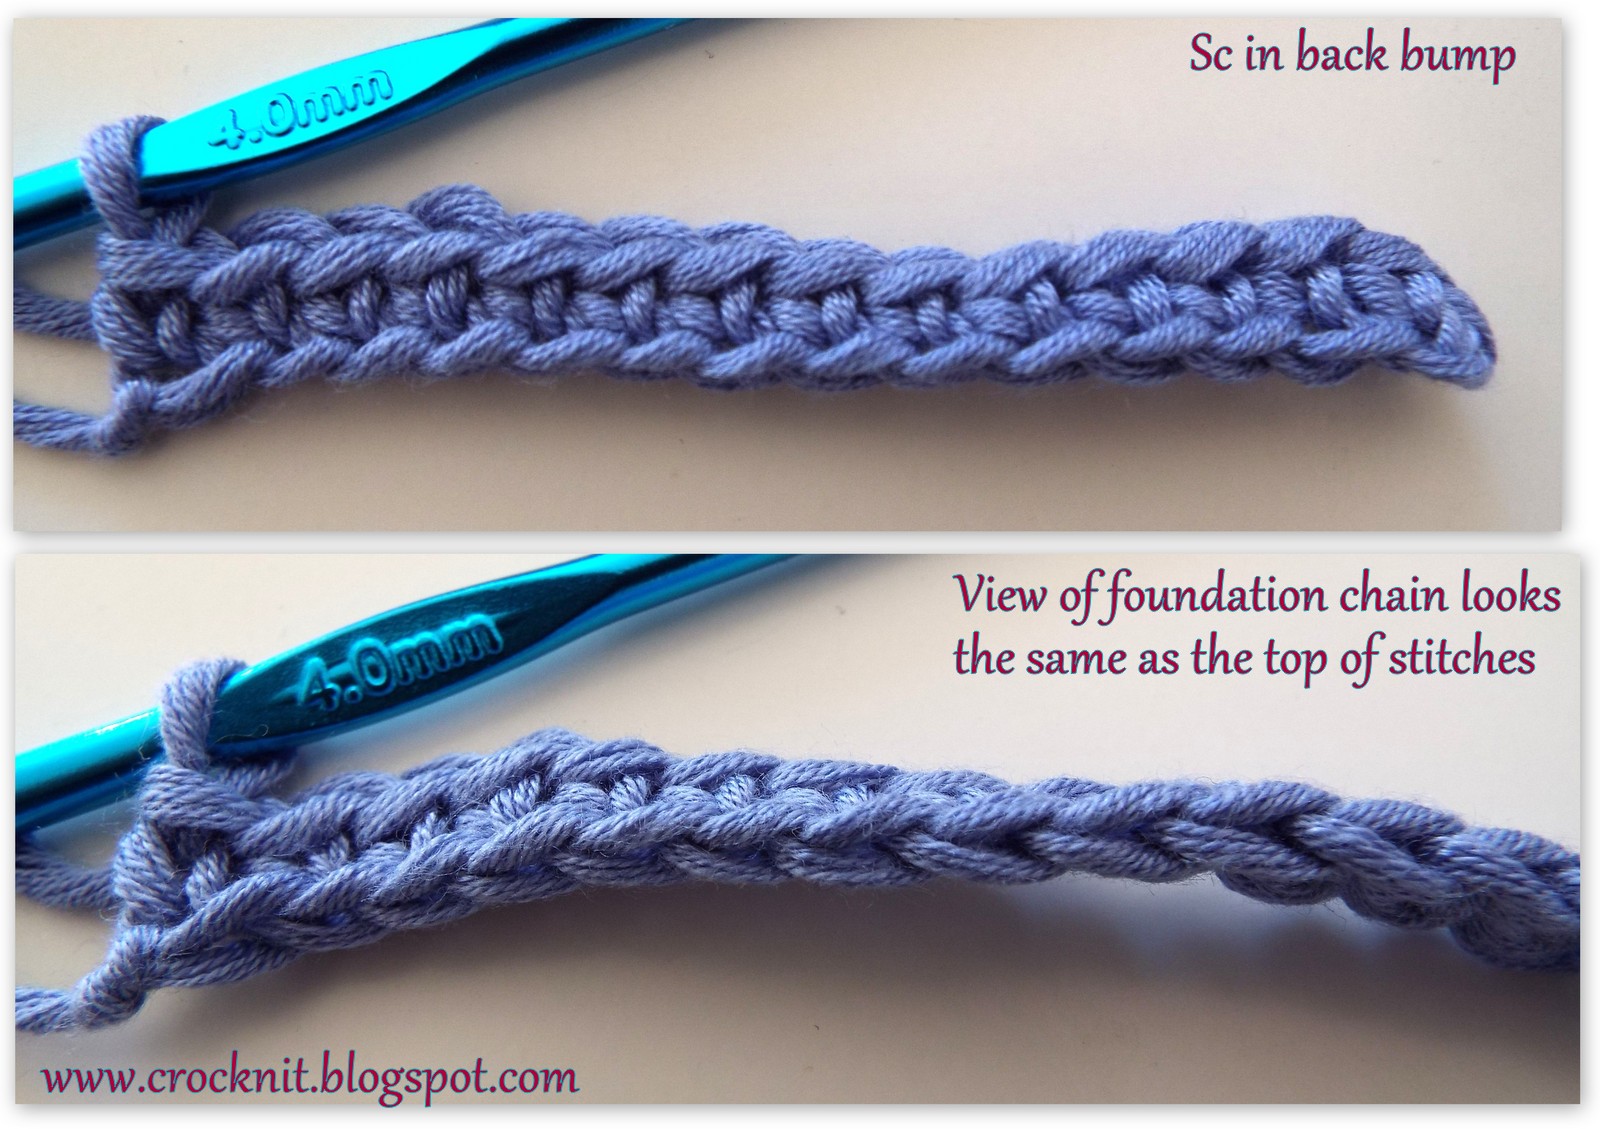 MICROCKNIT CREATIONS: How to Crochet in Back Bump Tutorial